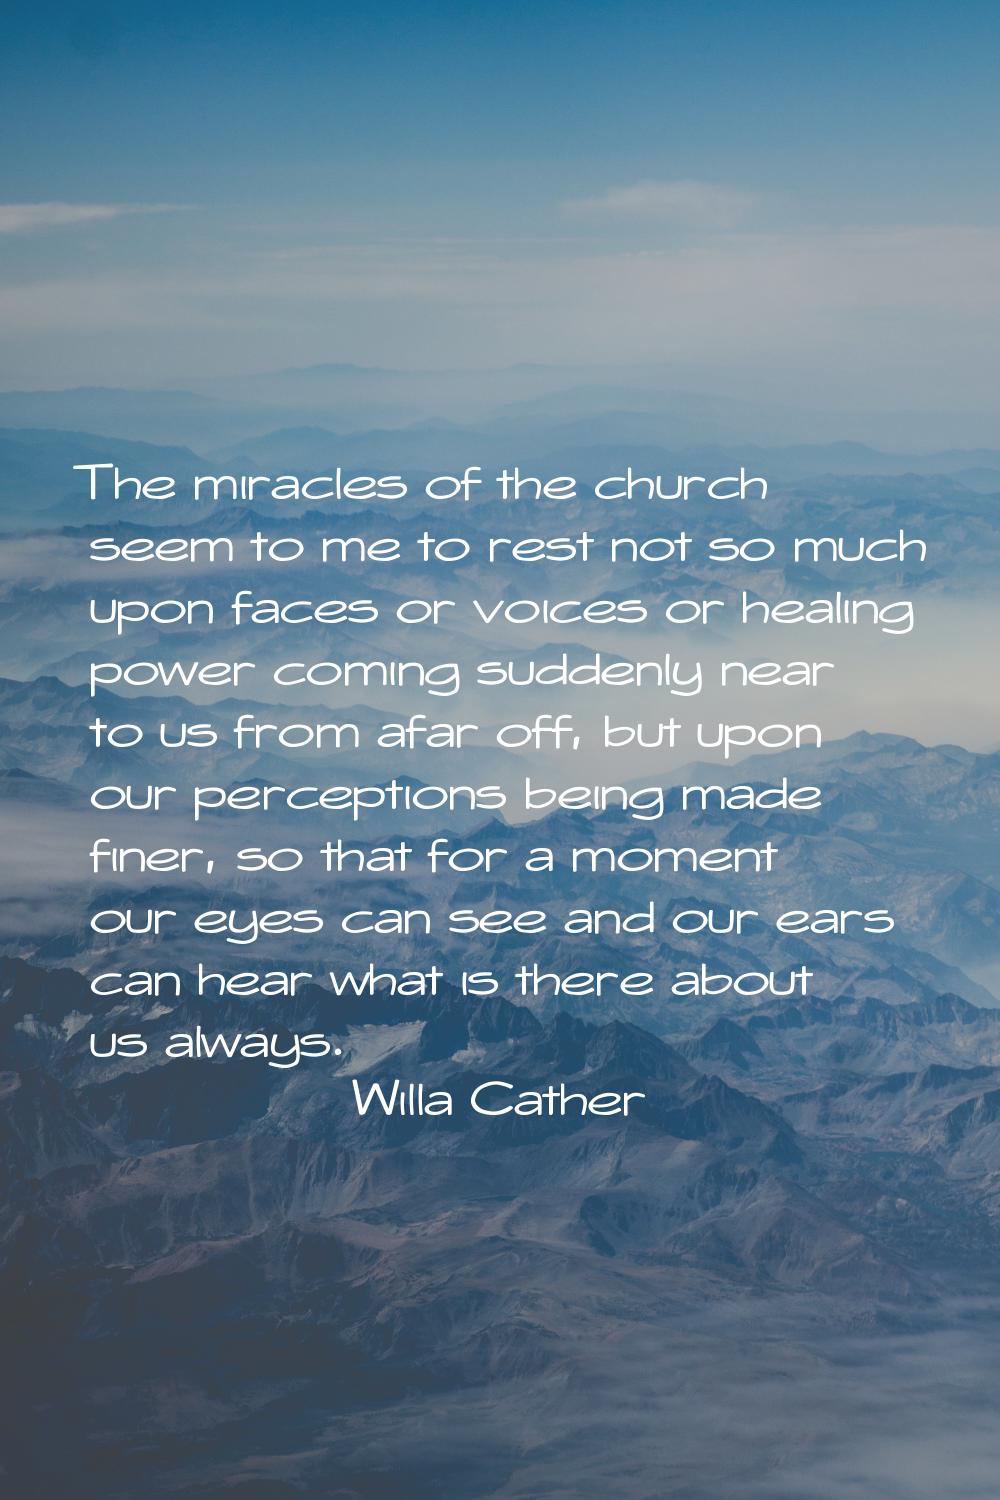 The miracles of the church seem to me to rest not so much upon faces or voices or healing power com